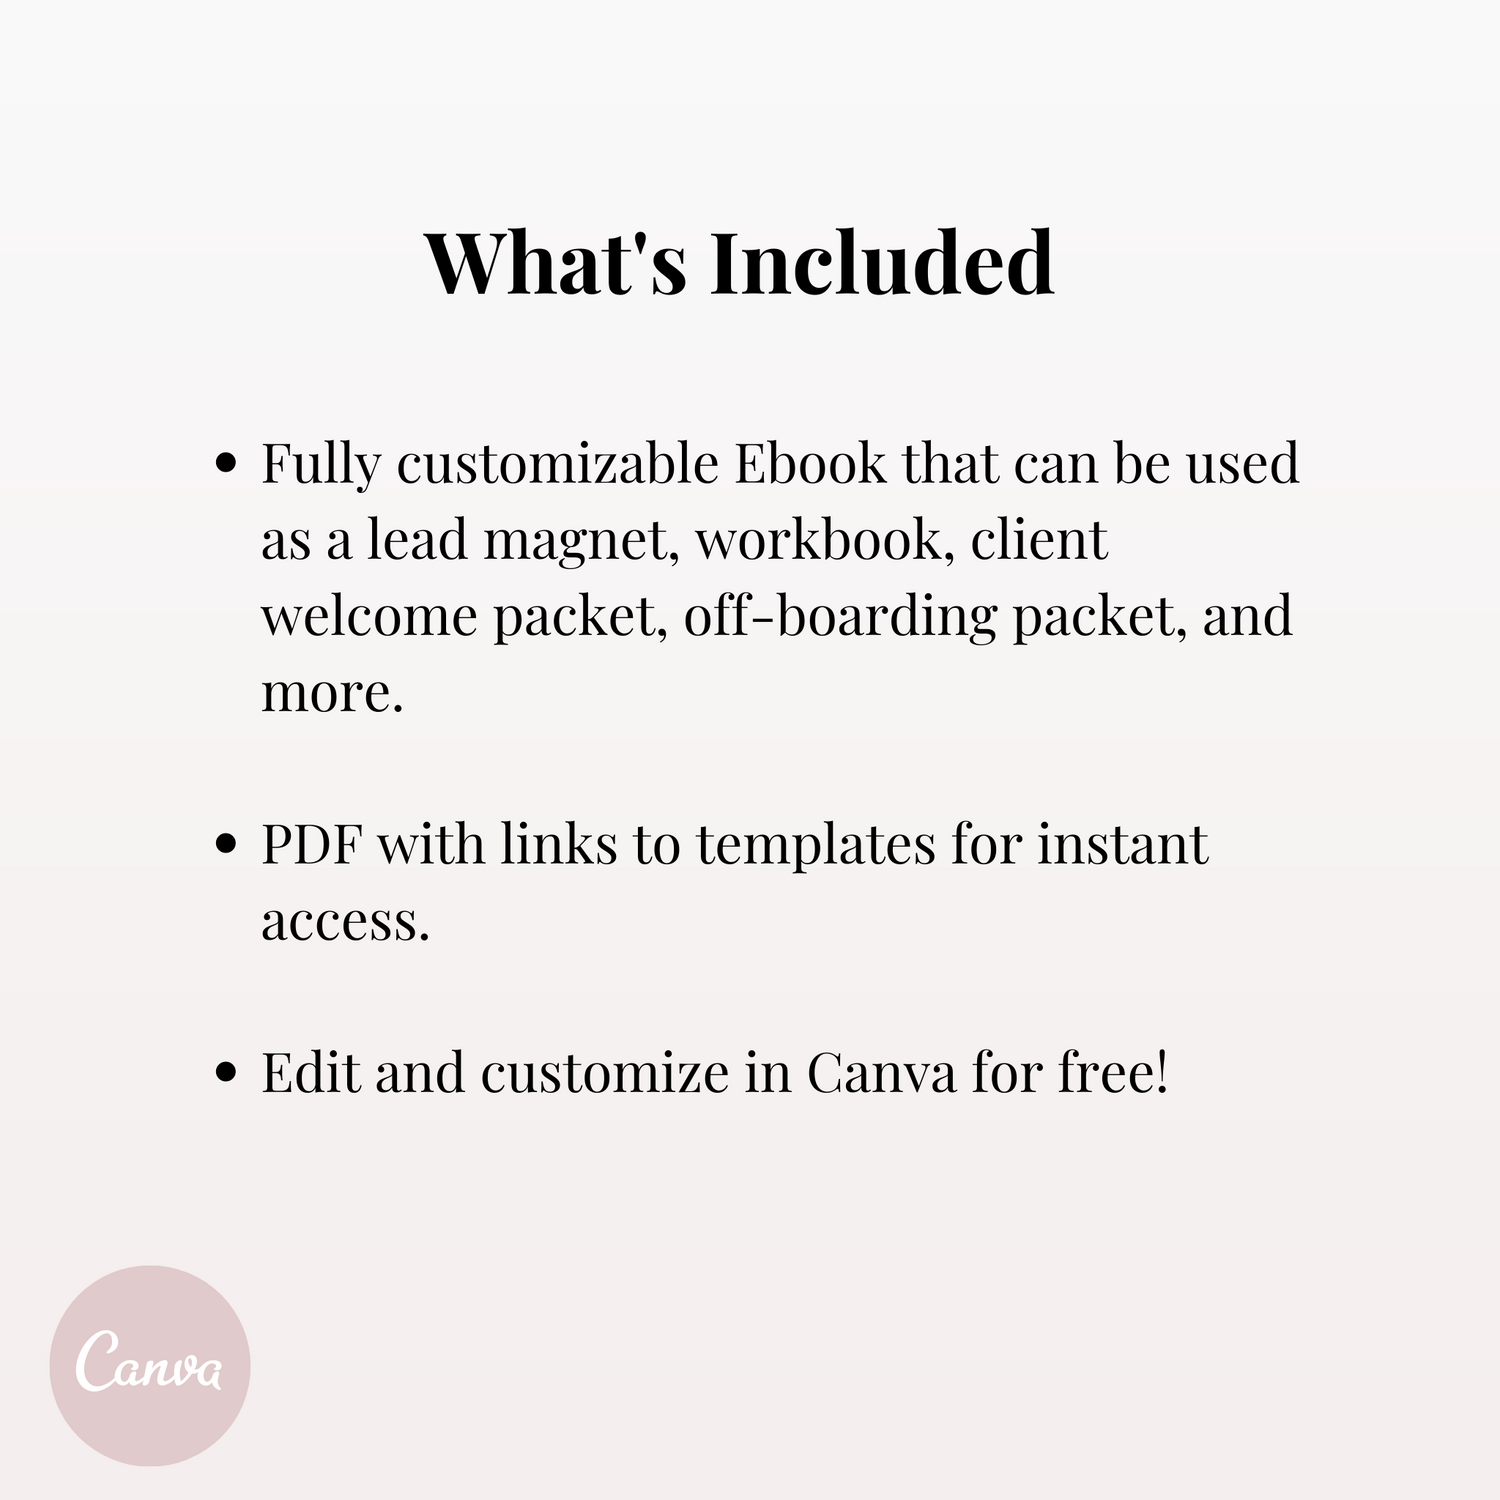 The feminine lead magnet and work book templates are professionally designed in Canva and easily customizable using a free Canva account. The done-for-you templates can be used as a lead magnet, workbook, client welcome packet, onboarding packet, off-boarding packet, and more. You get instant access to a complete template package that is designed to help you connect with potential and existing clients. 